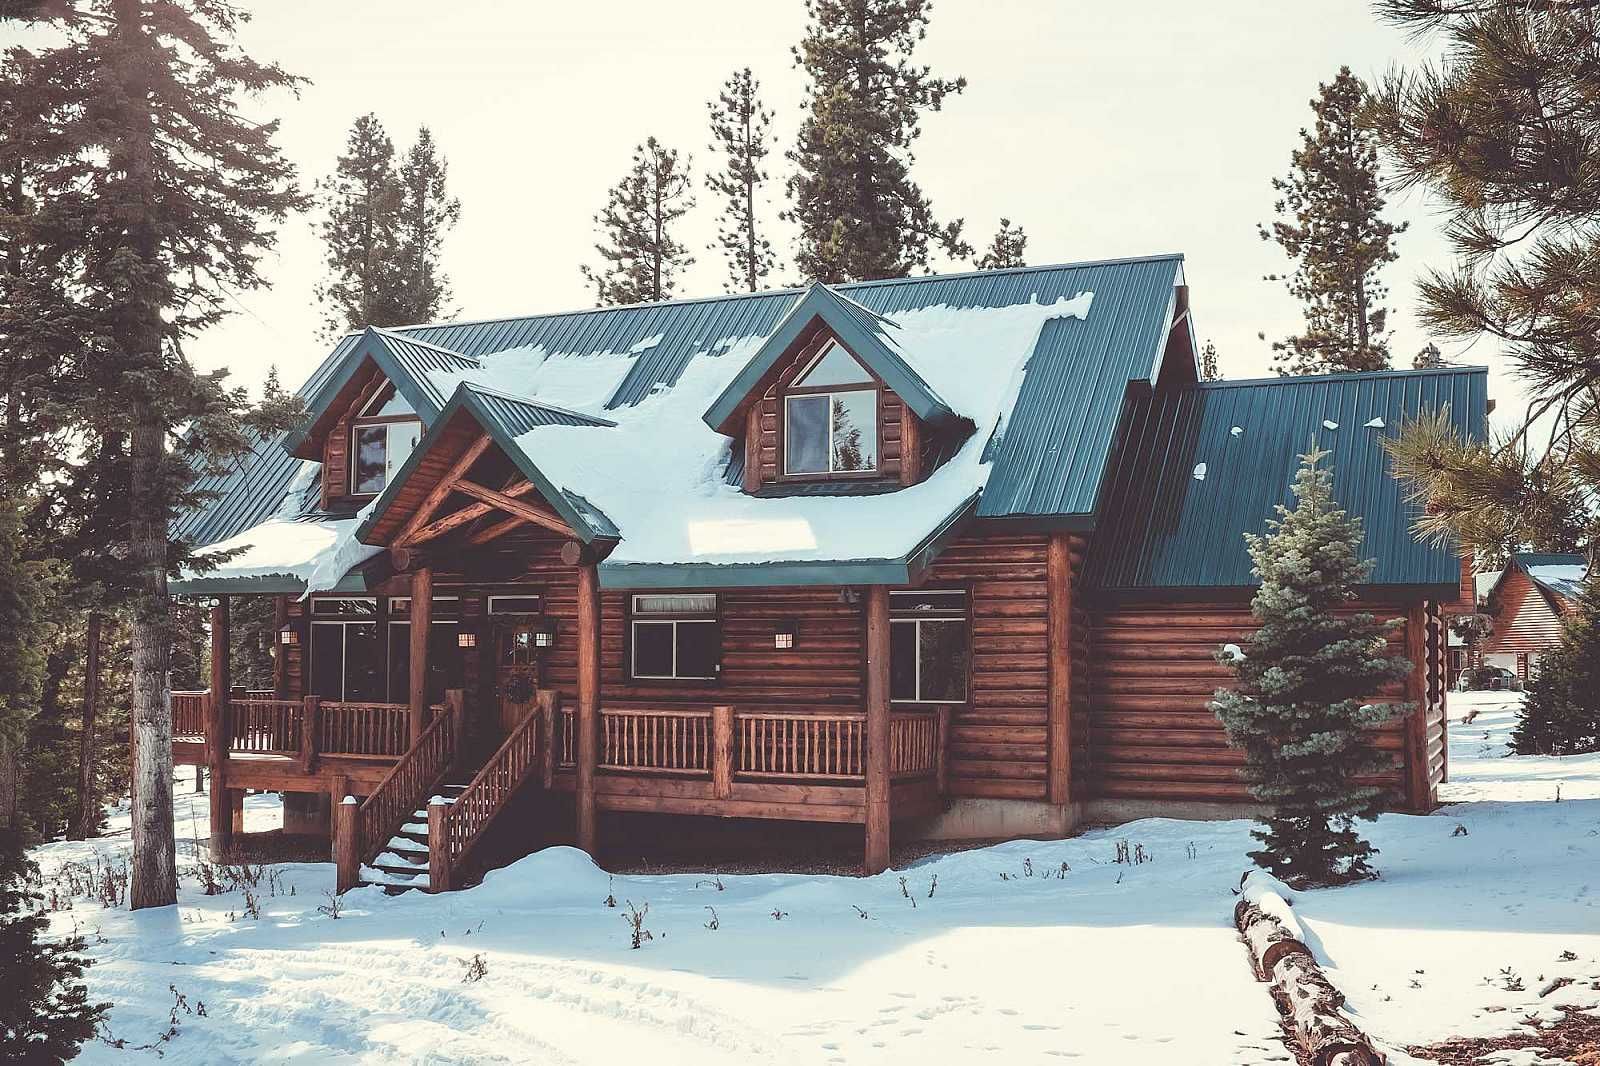 A large log cabin is surrounded by snow and trees